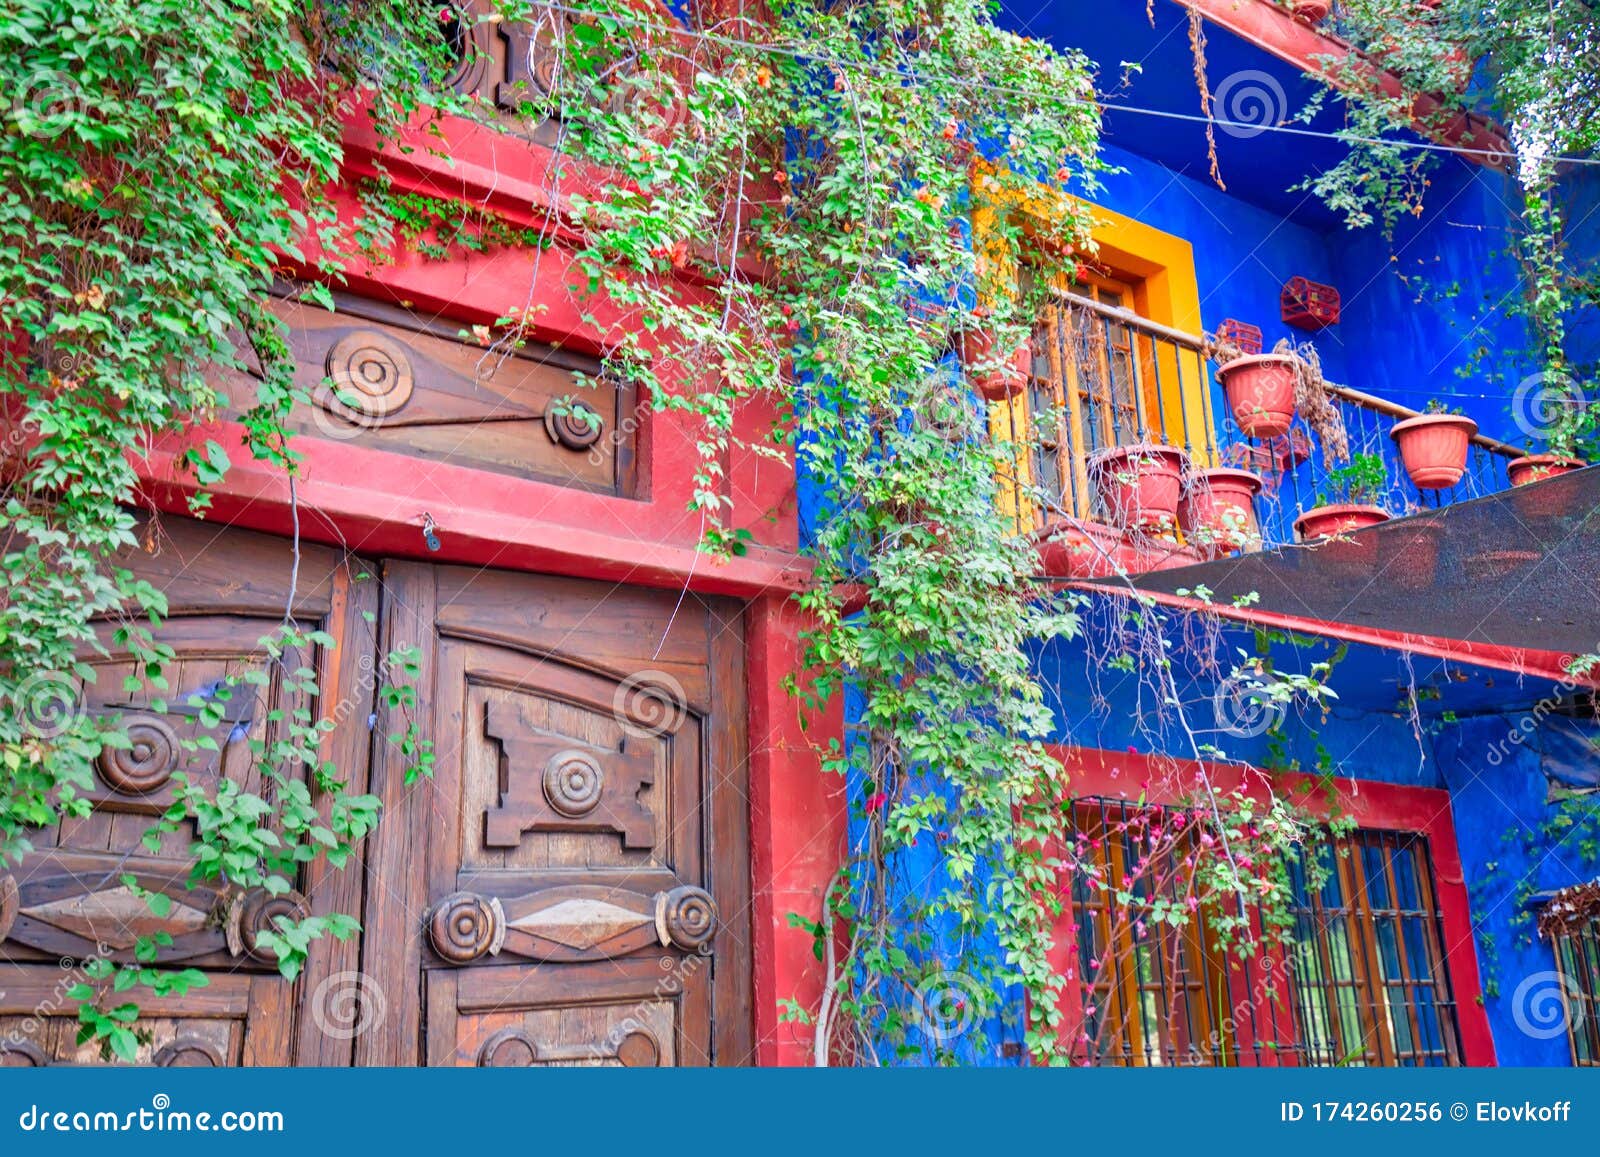 monterrey, colorful historic buildings in the center of the old city barrio antiguo